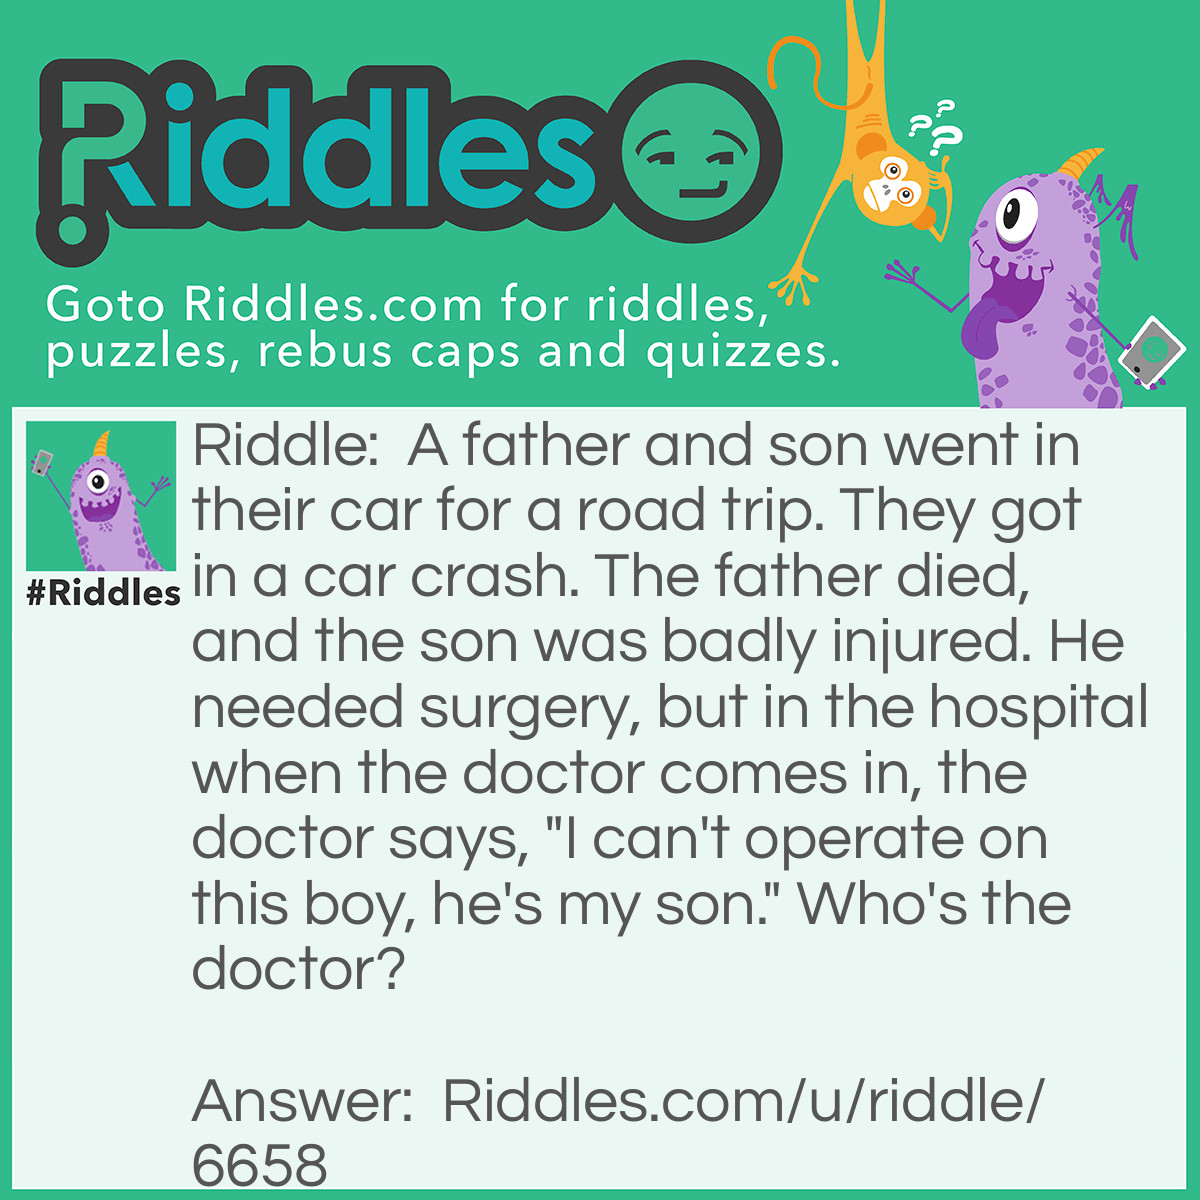 Riddle: A father and son went in their car for a road trip. They got in a car crash. The father died, and the son was badly injured. He needed surgery, but in the hospital when the doctor comes in, the doctor says, "I can't operate on this boy, he's my son." Who's the doctor? Answer: Boys mother